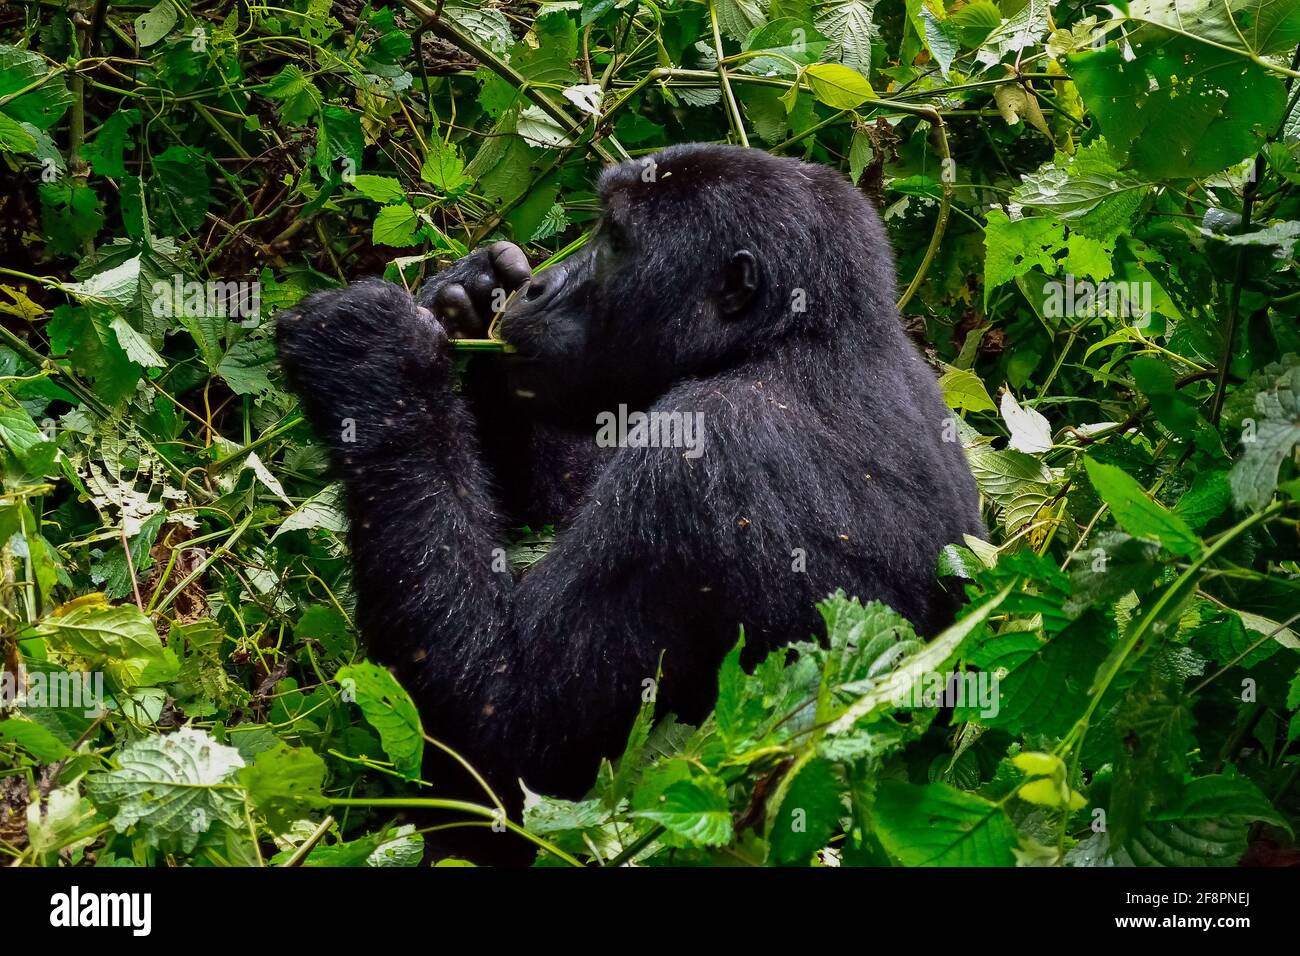 Eating. One of the approximately 400 endangered Eastern Mountain Gorillas living in the Bwindi Impenetrable National Park, Uganda. Stock Photo